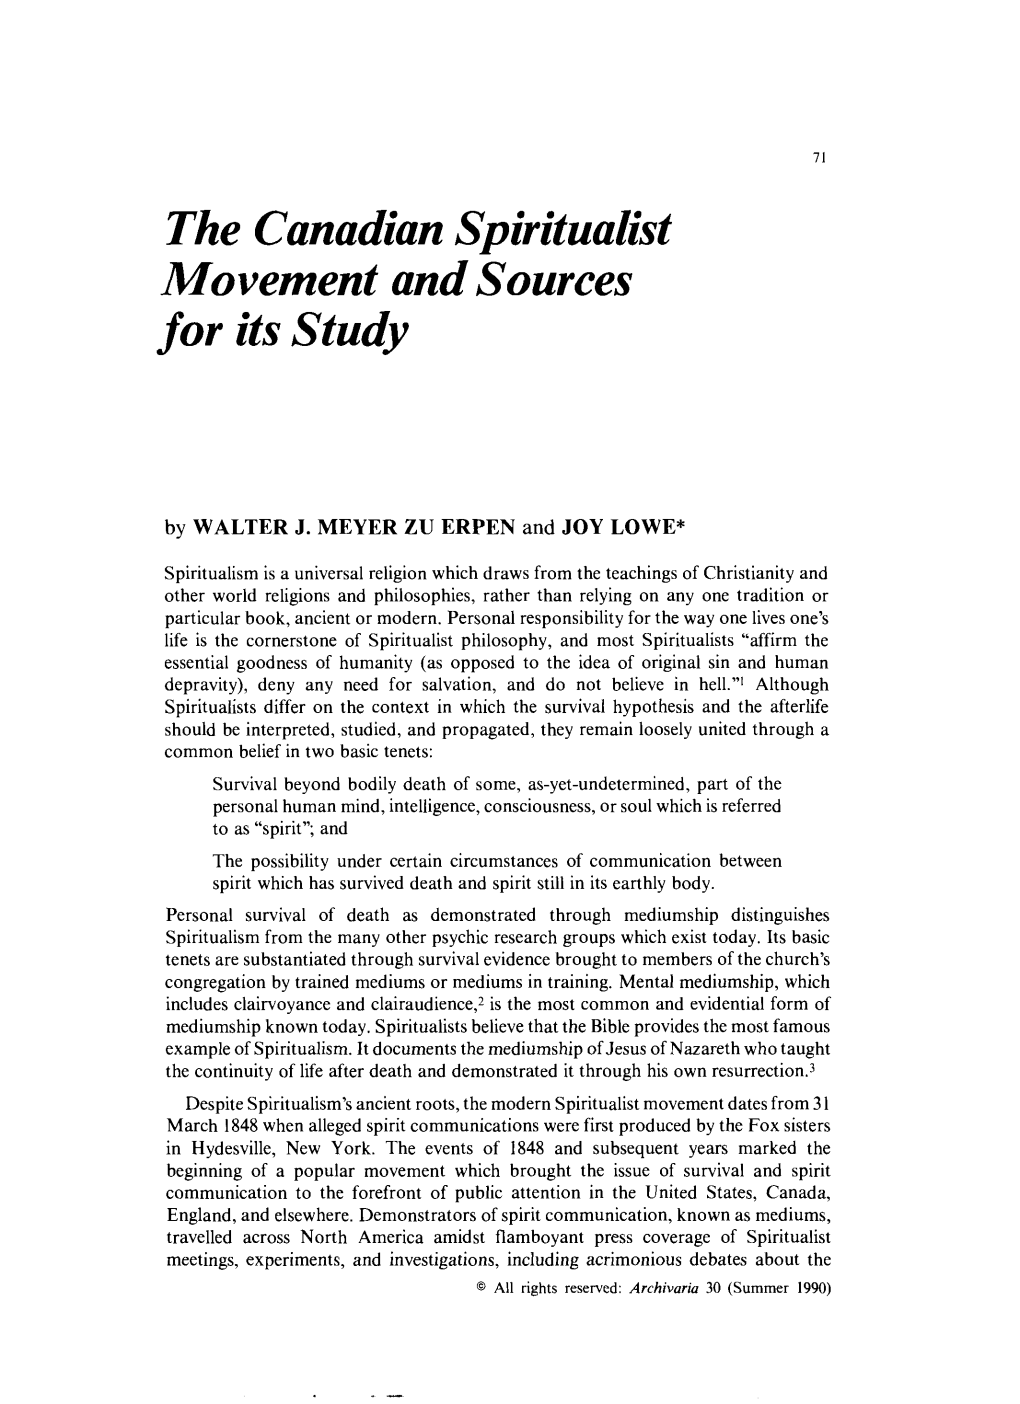 The Canadian Spiritualist Movement and Sources for Its Study